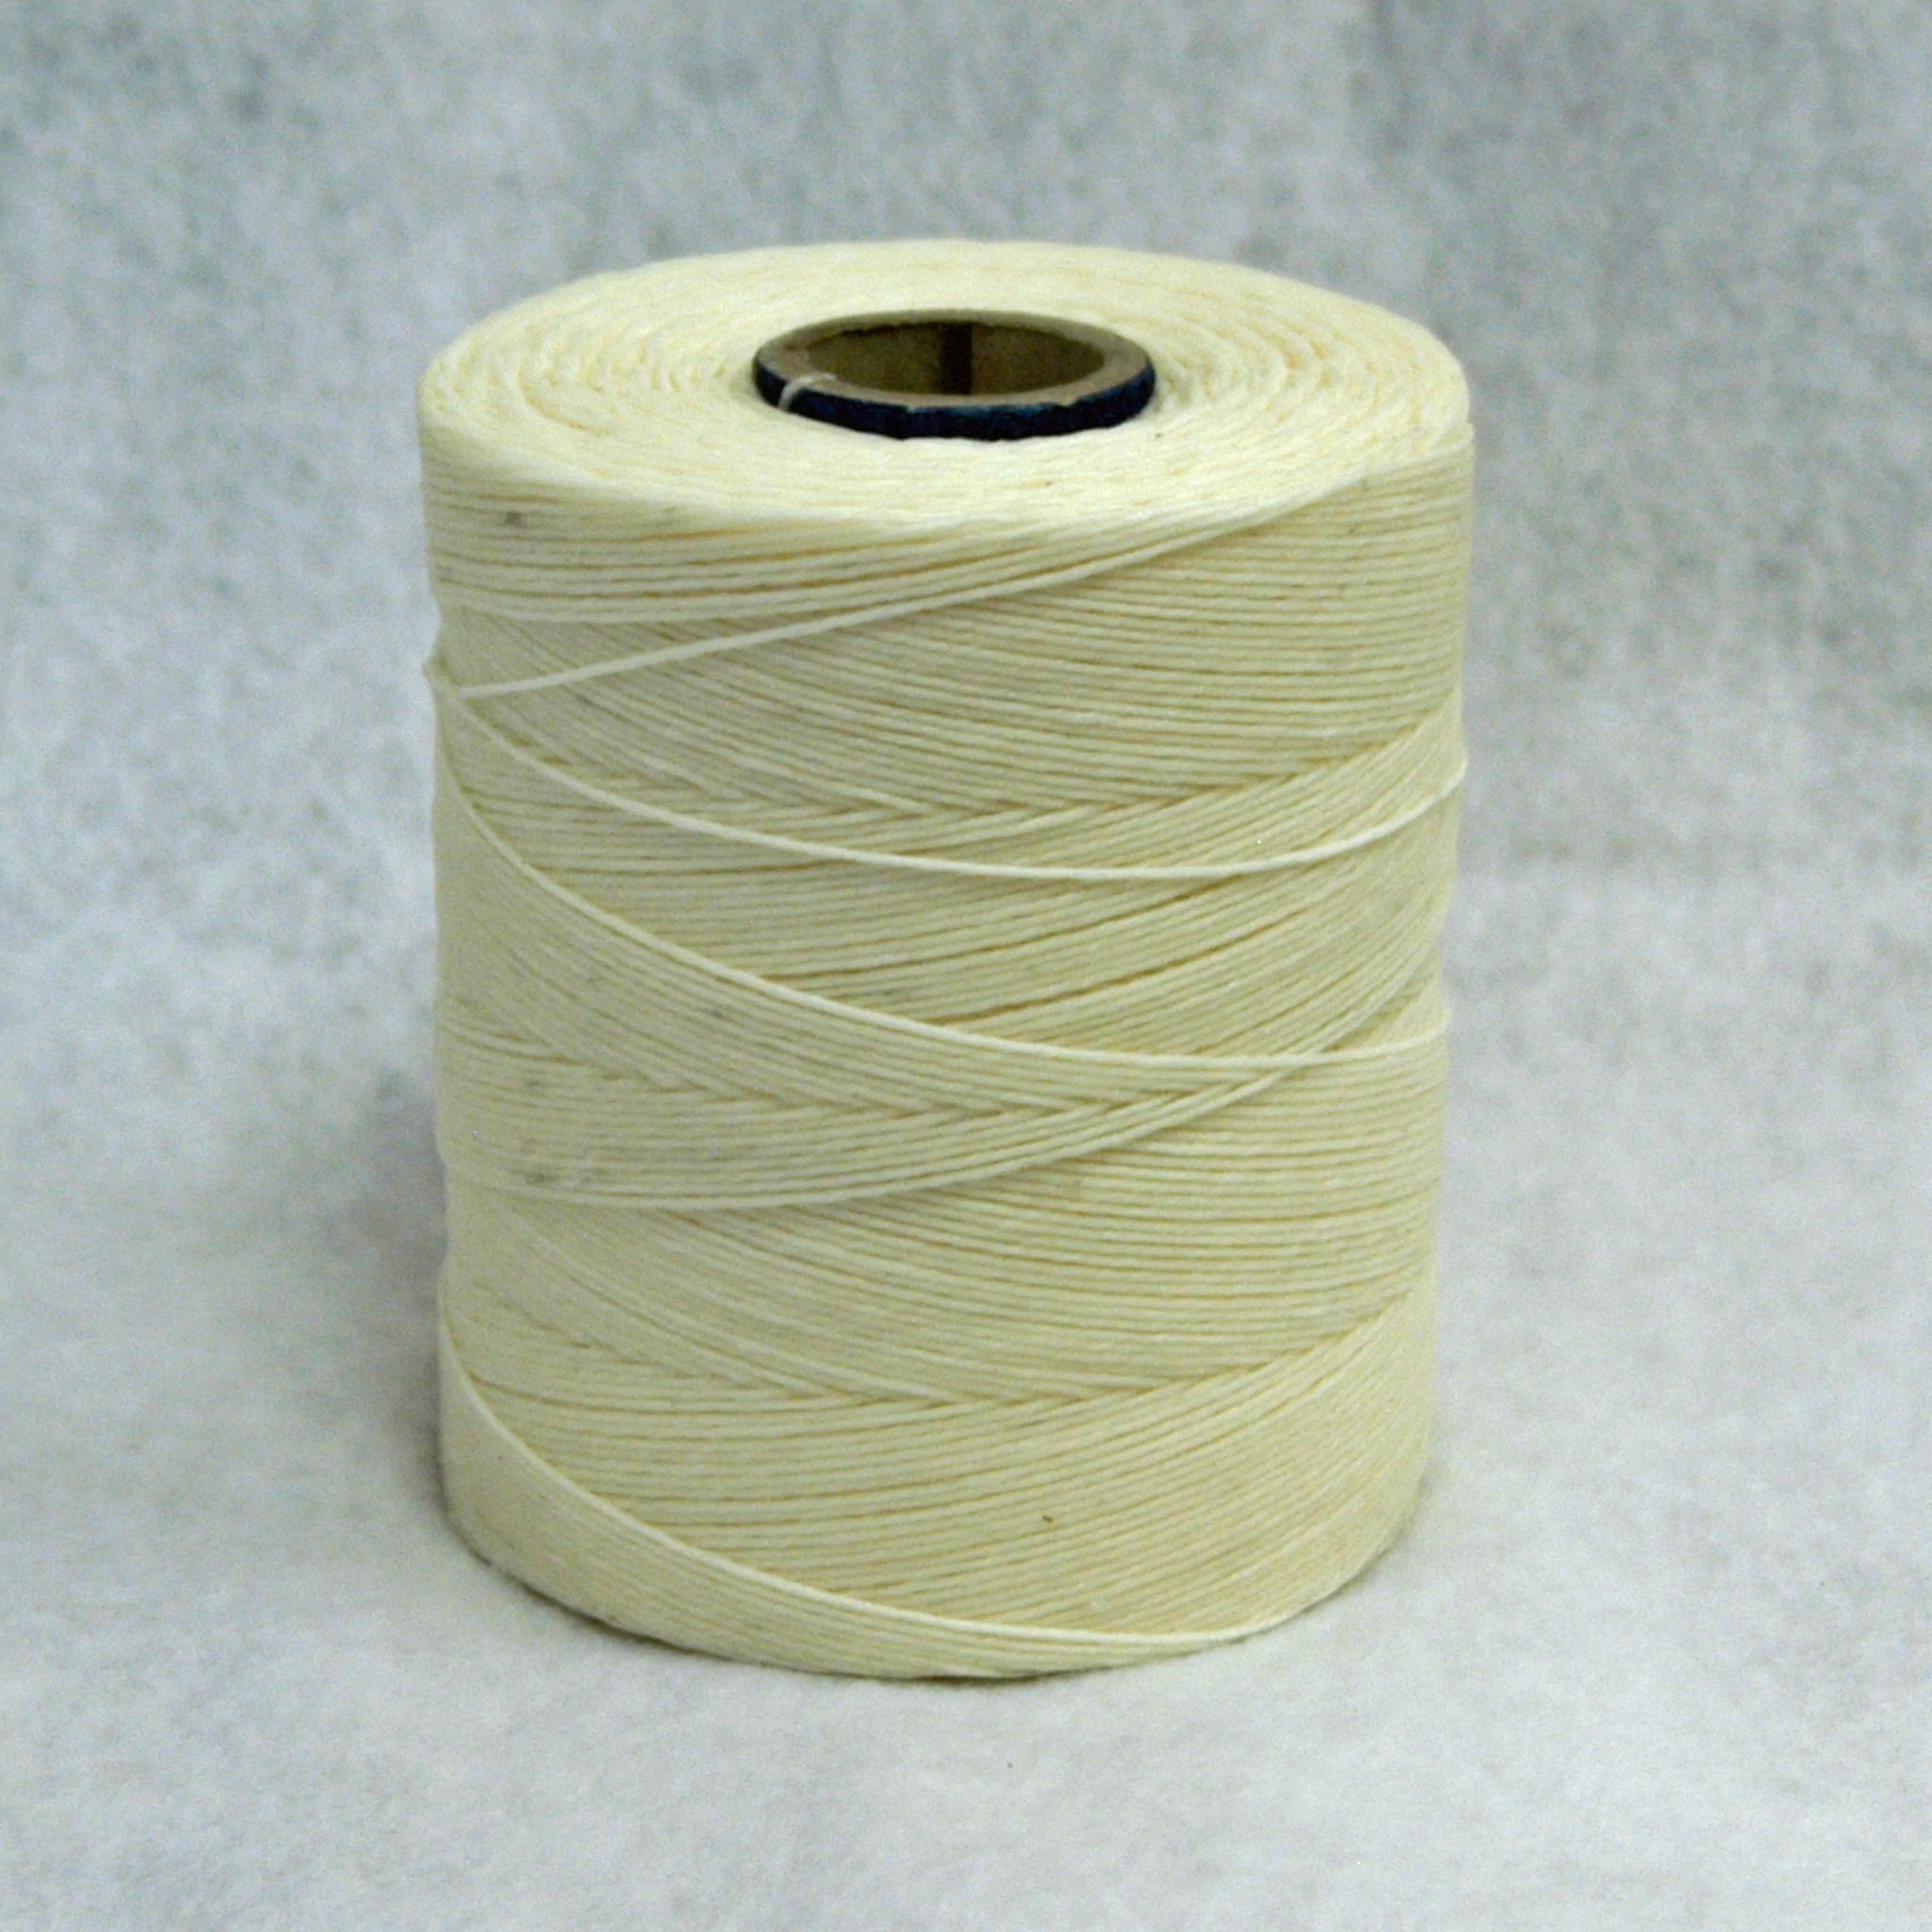 Linen Lacing for Telecommunications, Electronic and Electric industry - 8 Cord: Case of 24 Spools